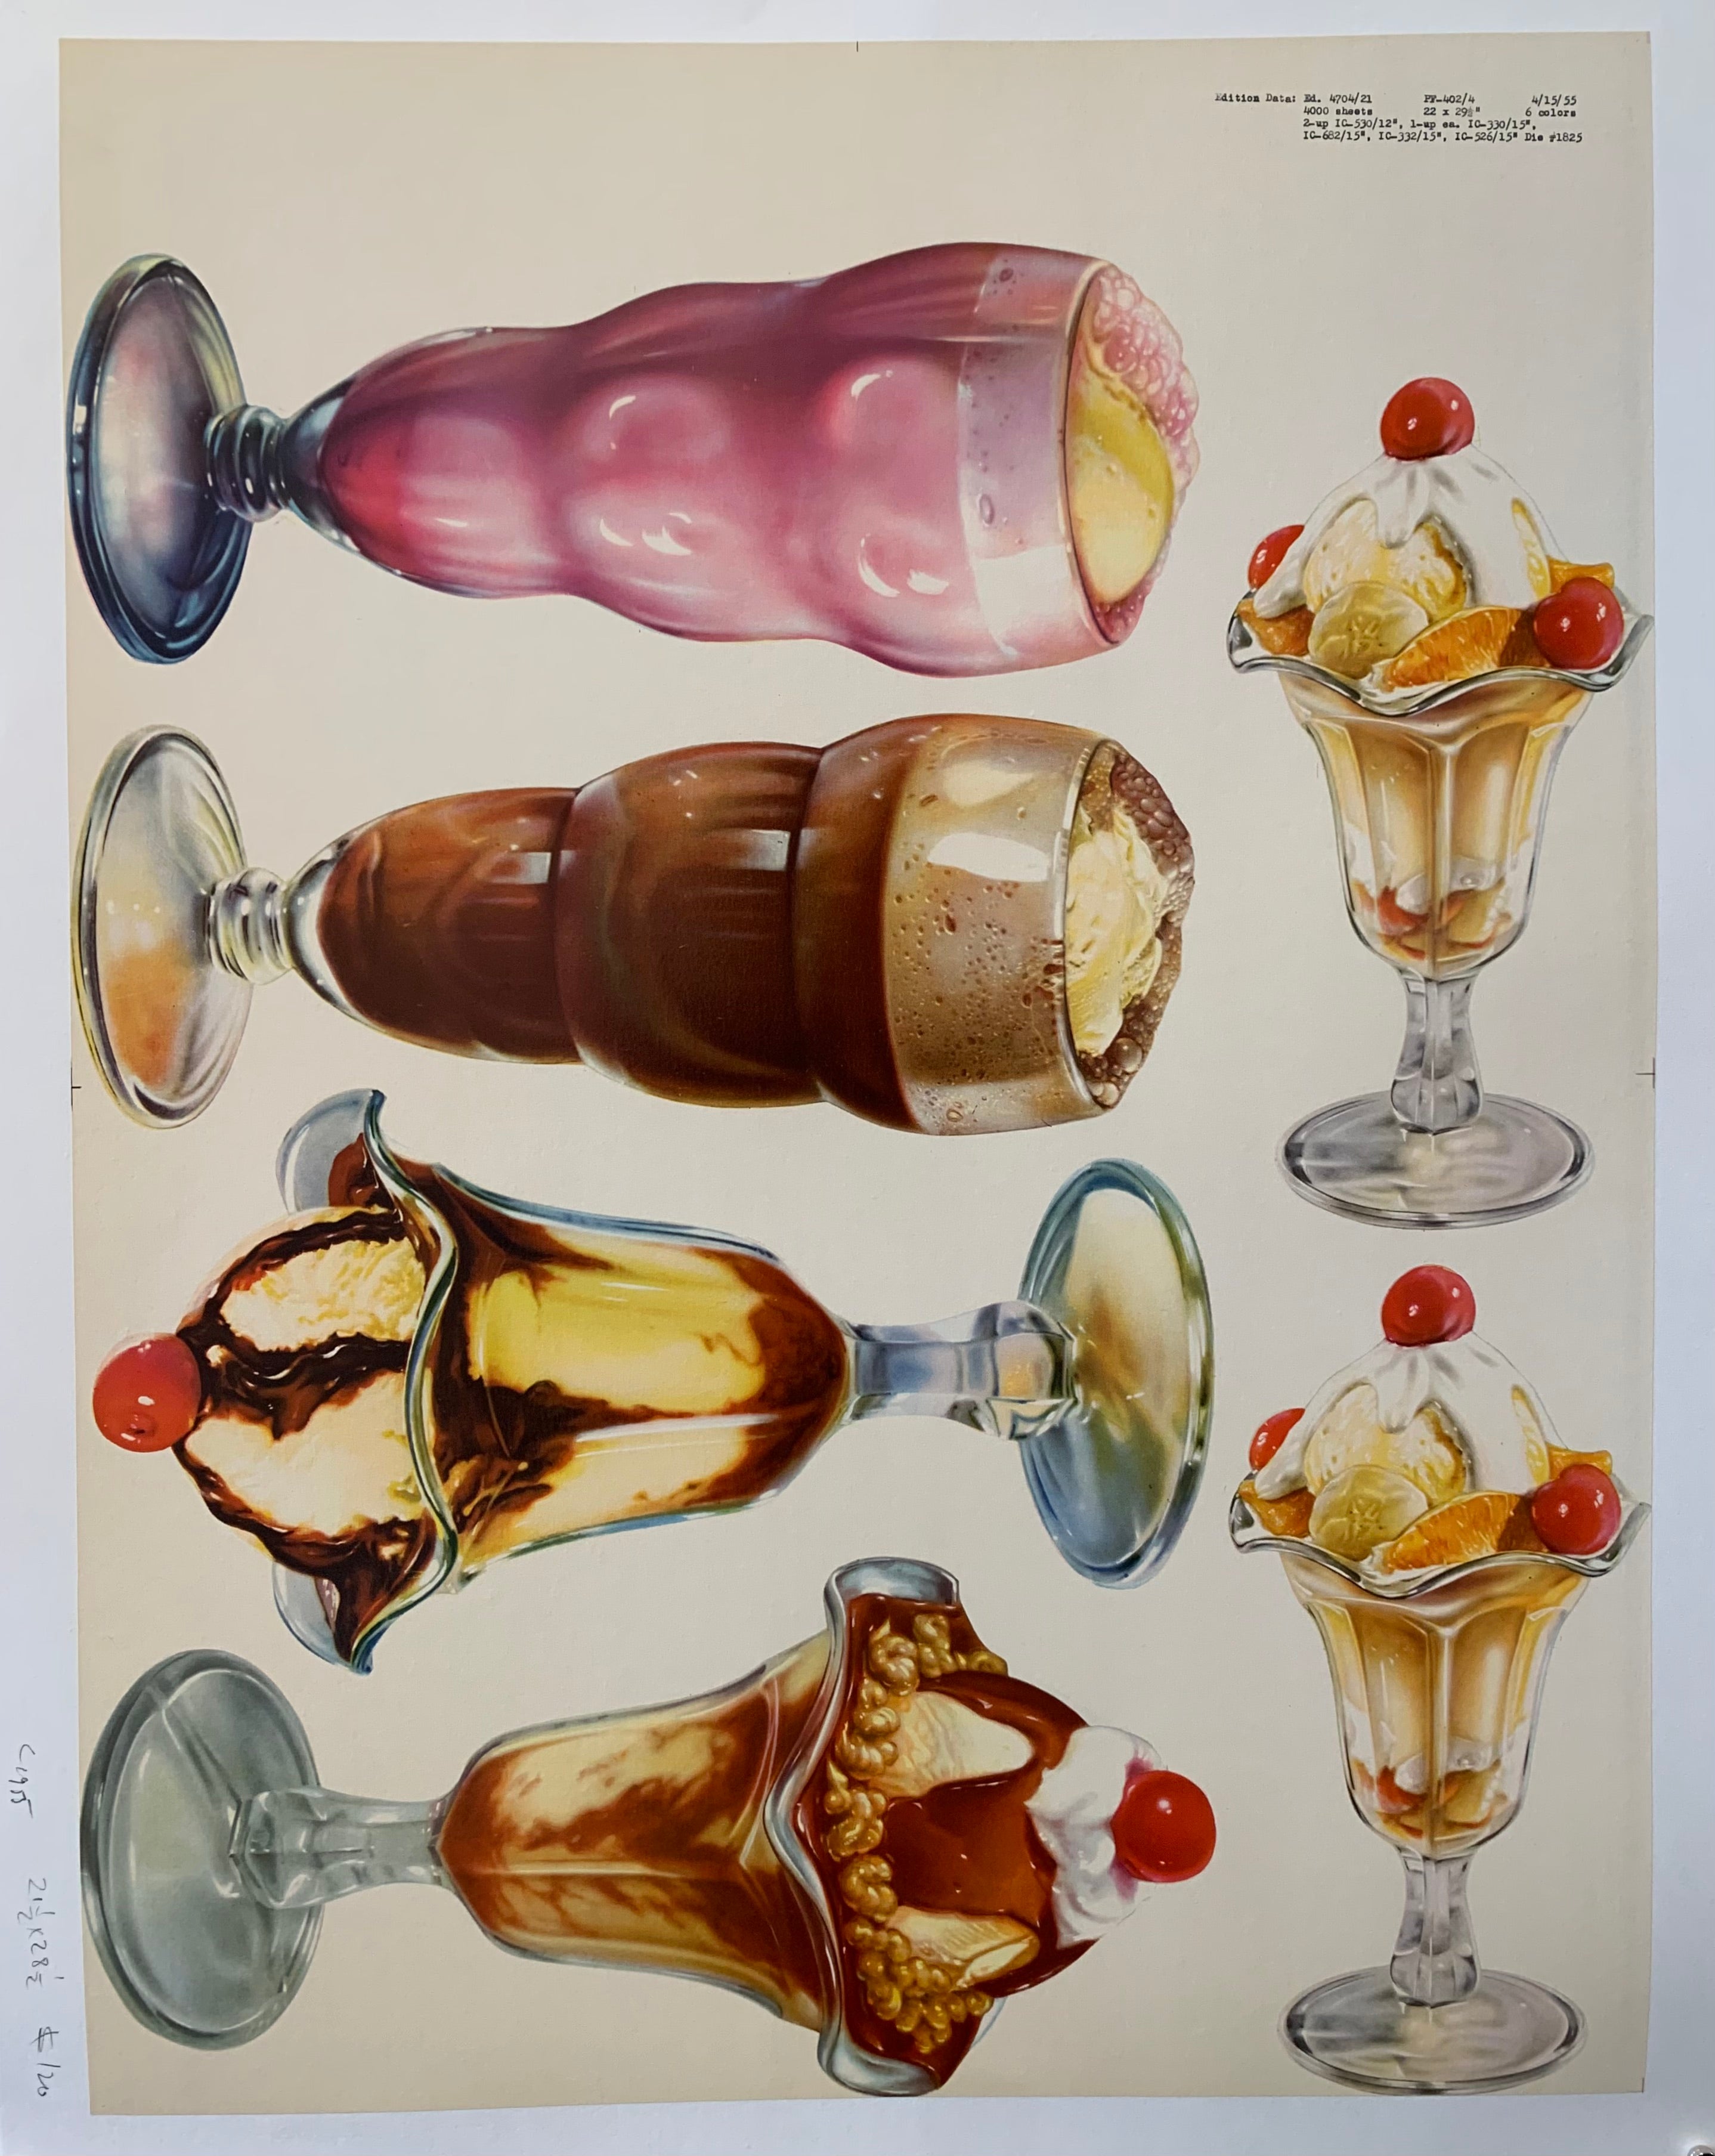 Floats and Sundaes